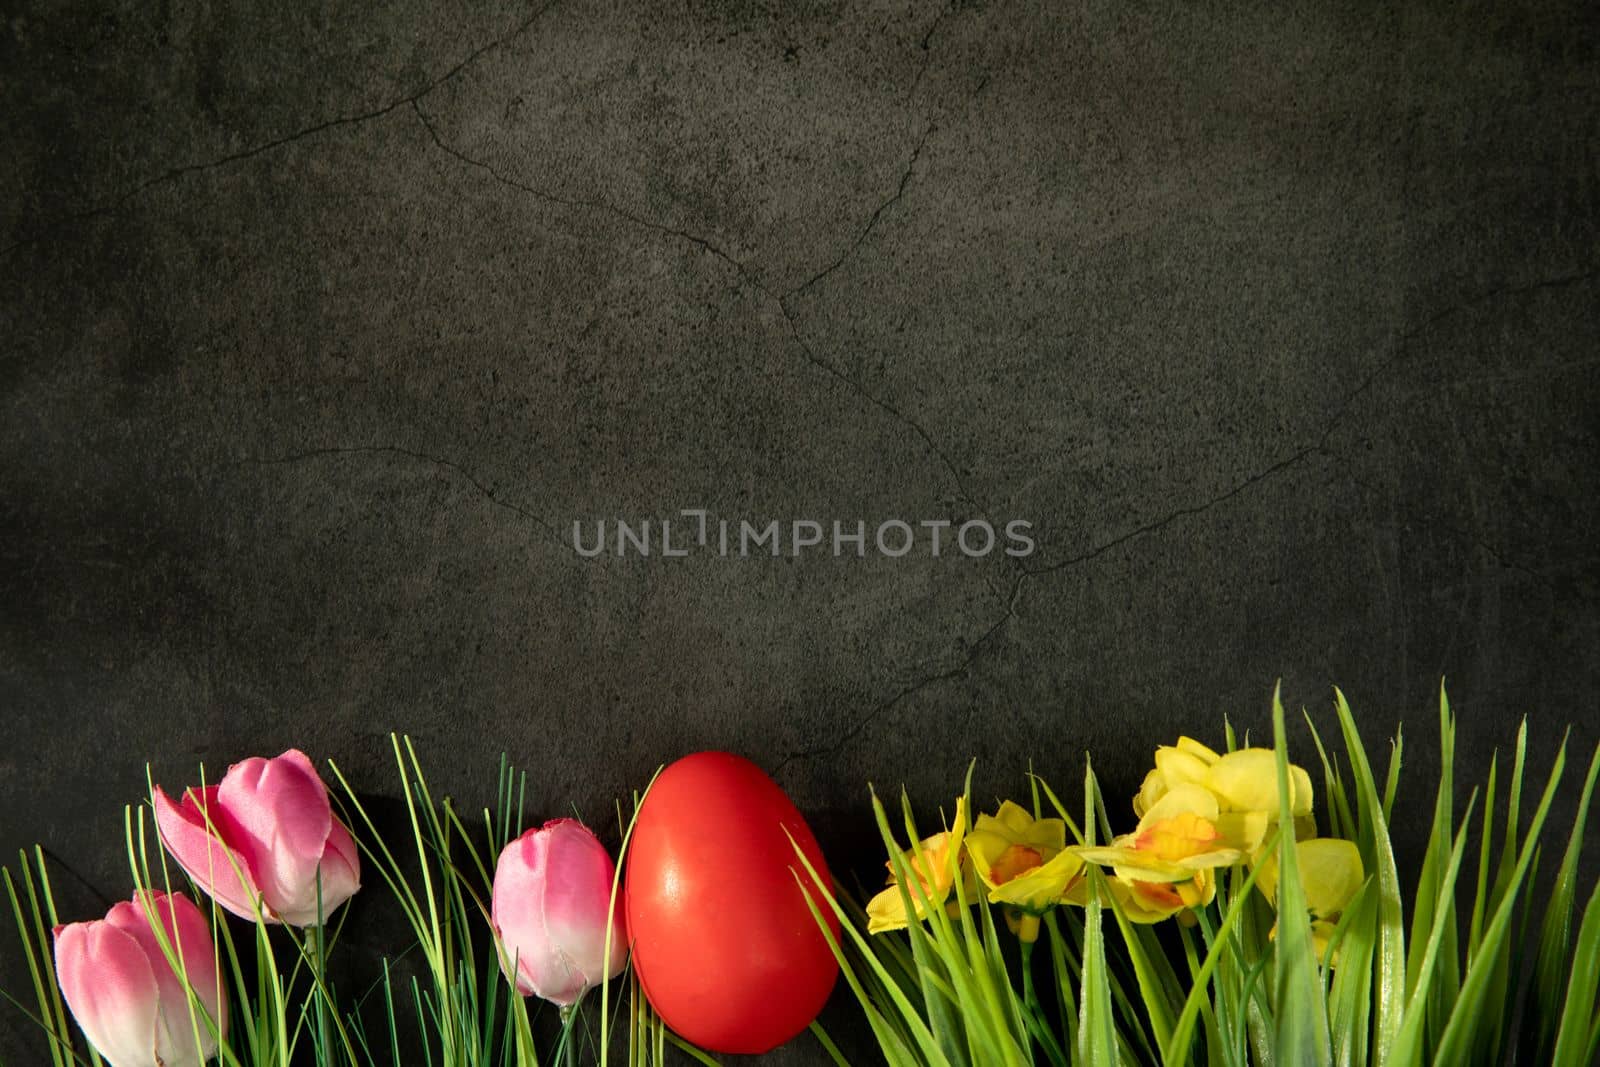 Easter eggs on fresh green grass against grey concrete background, colorful pink tulips and yellow daisies. Happy Easter holiday concept with copy space top view design by Annebel146